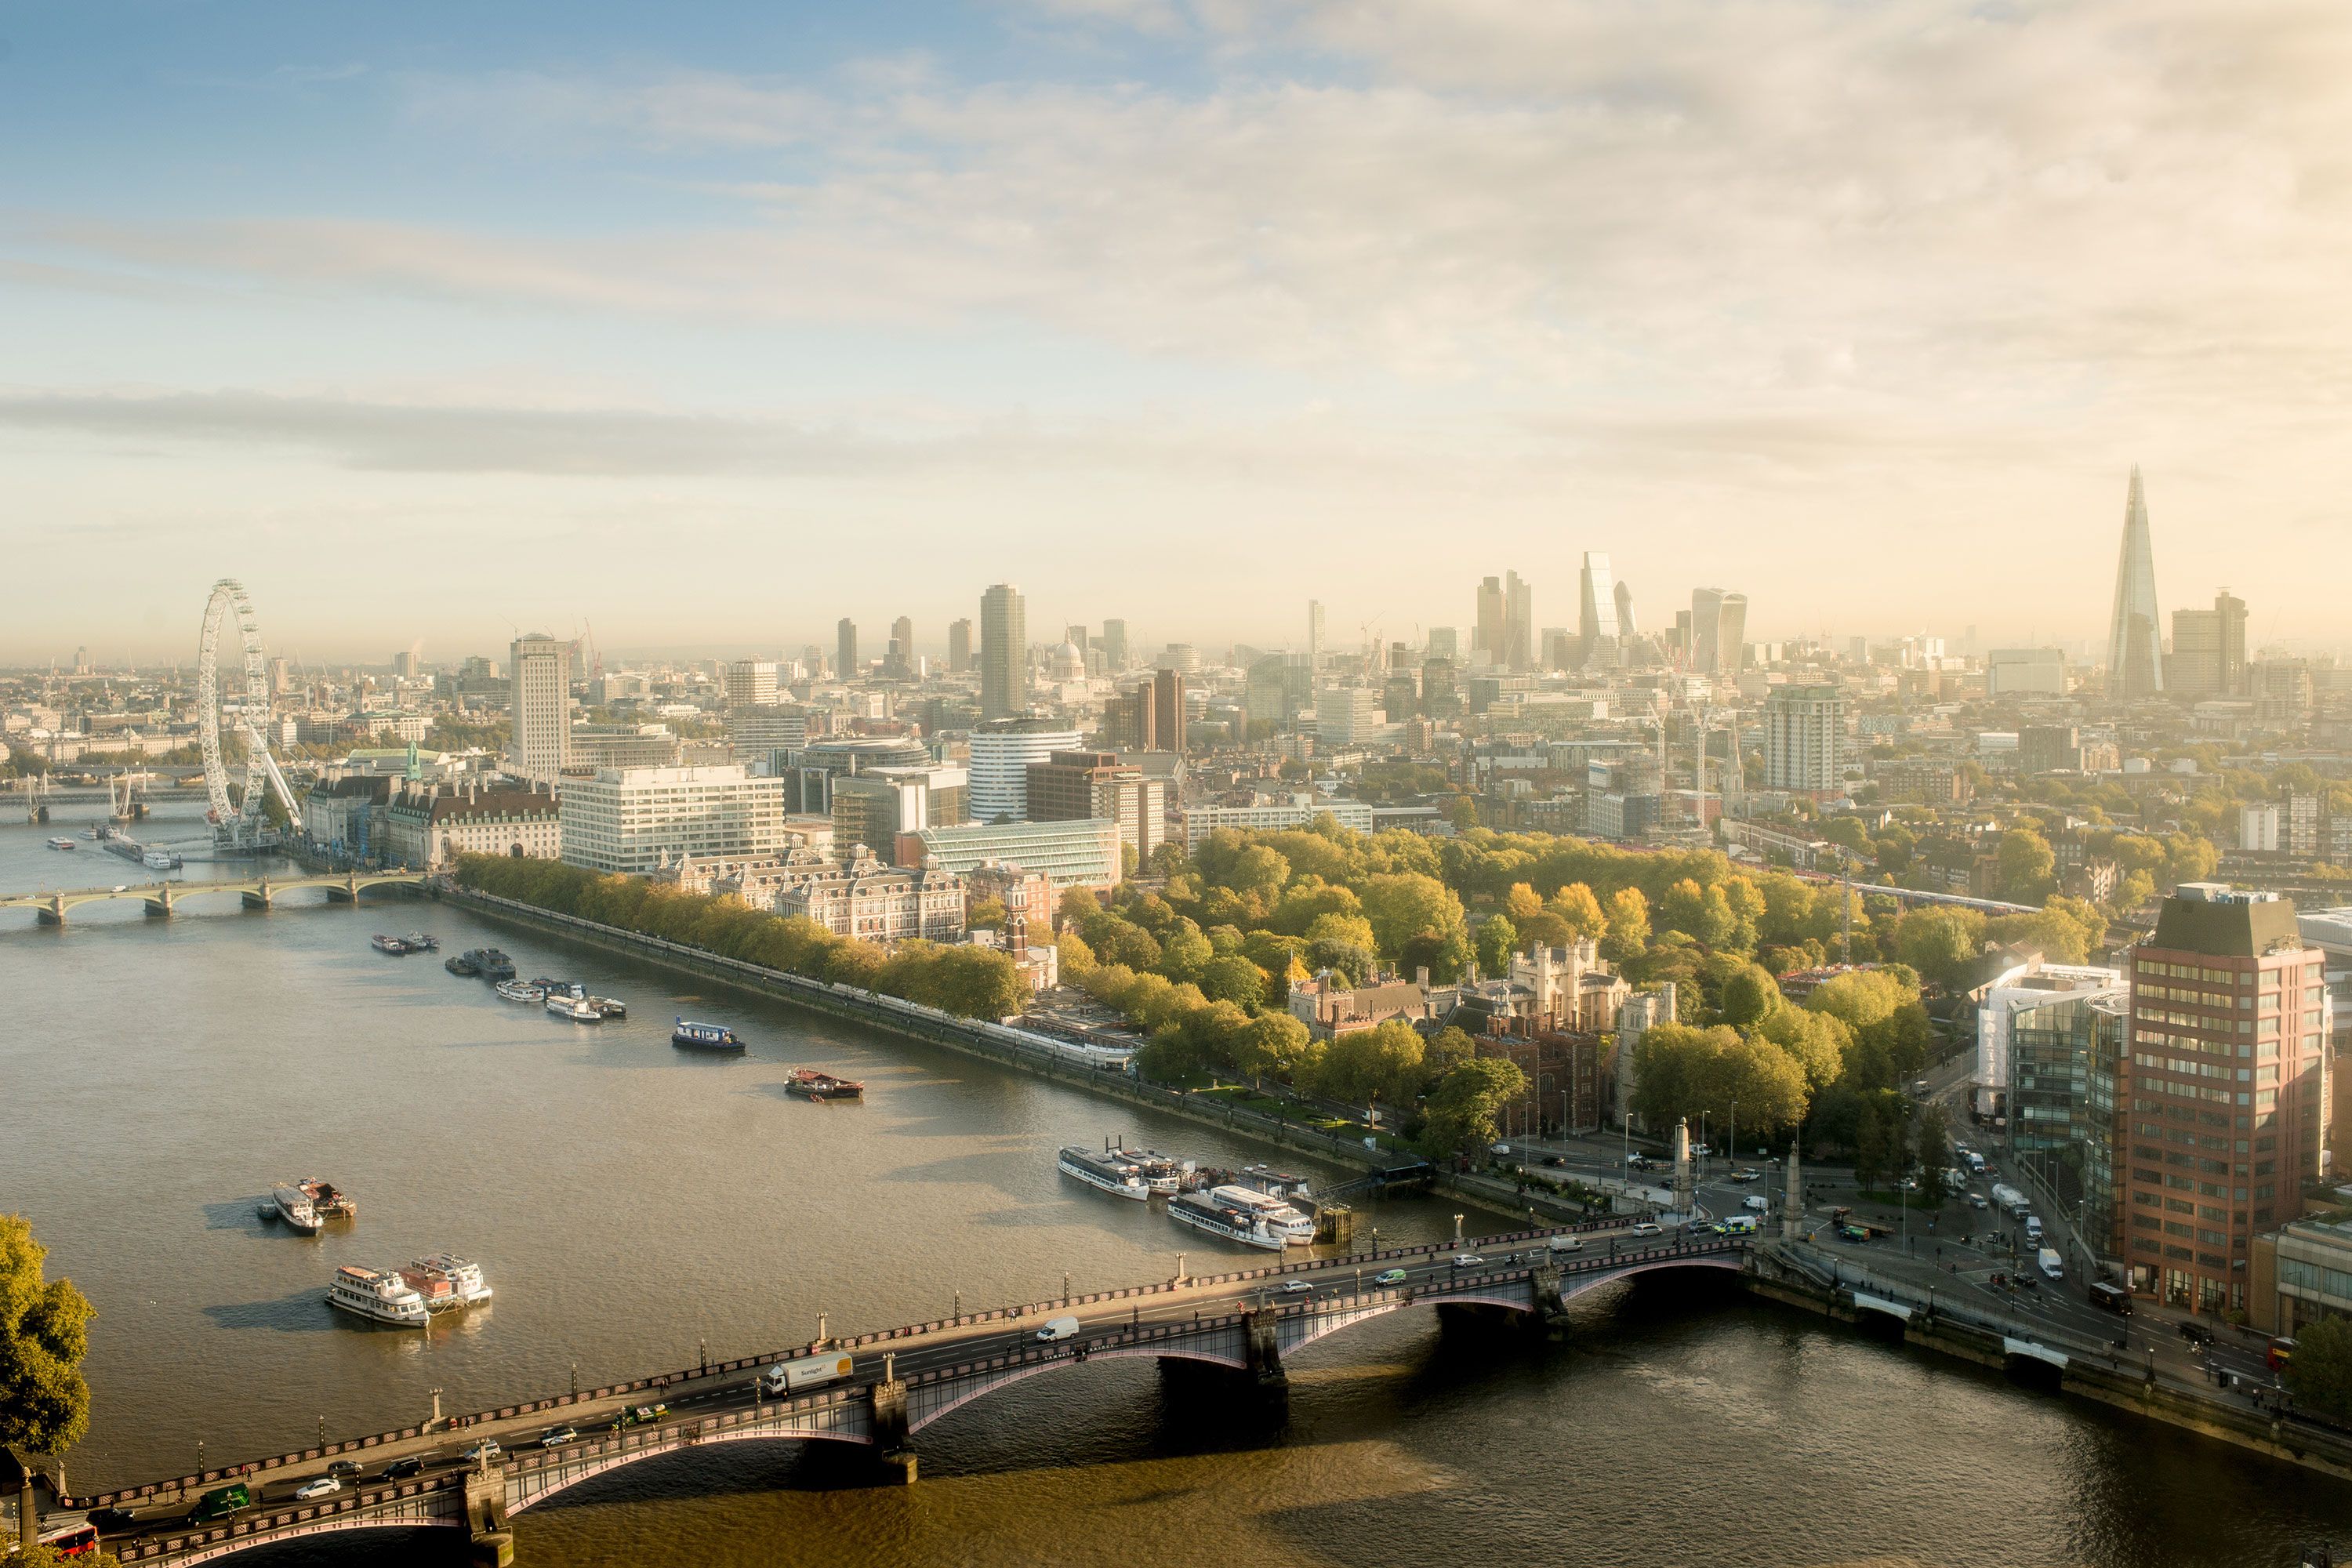 A love letter to London, still the greatest city in the world